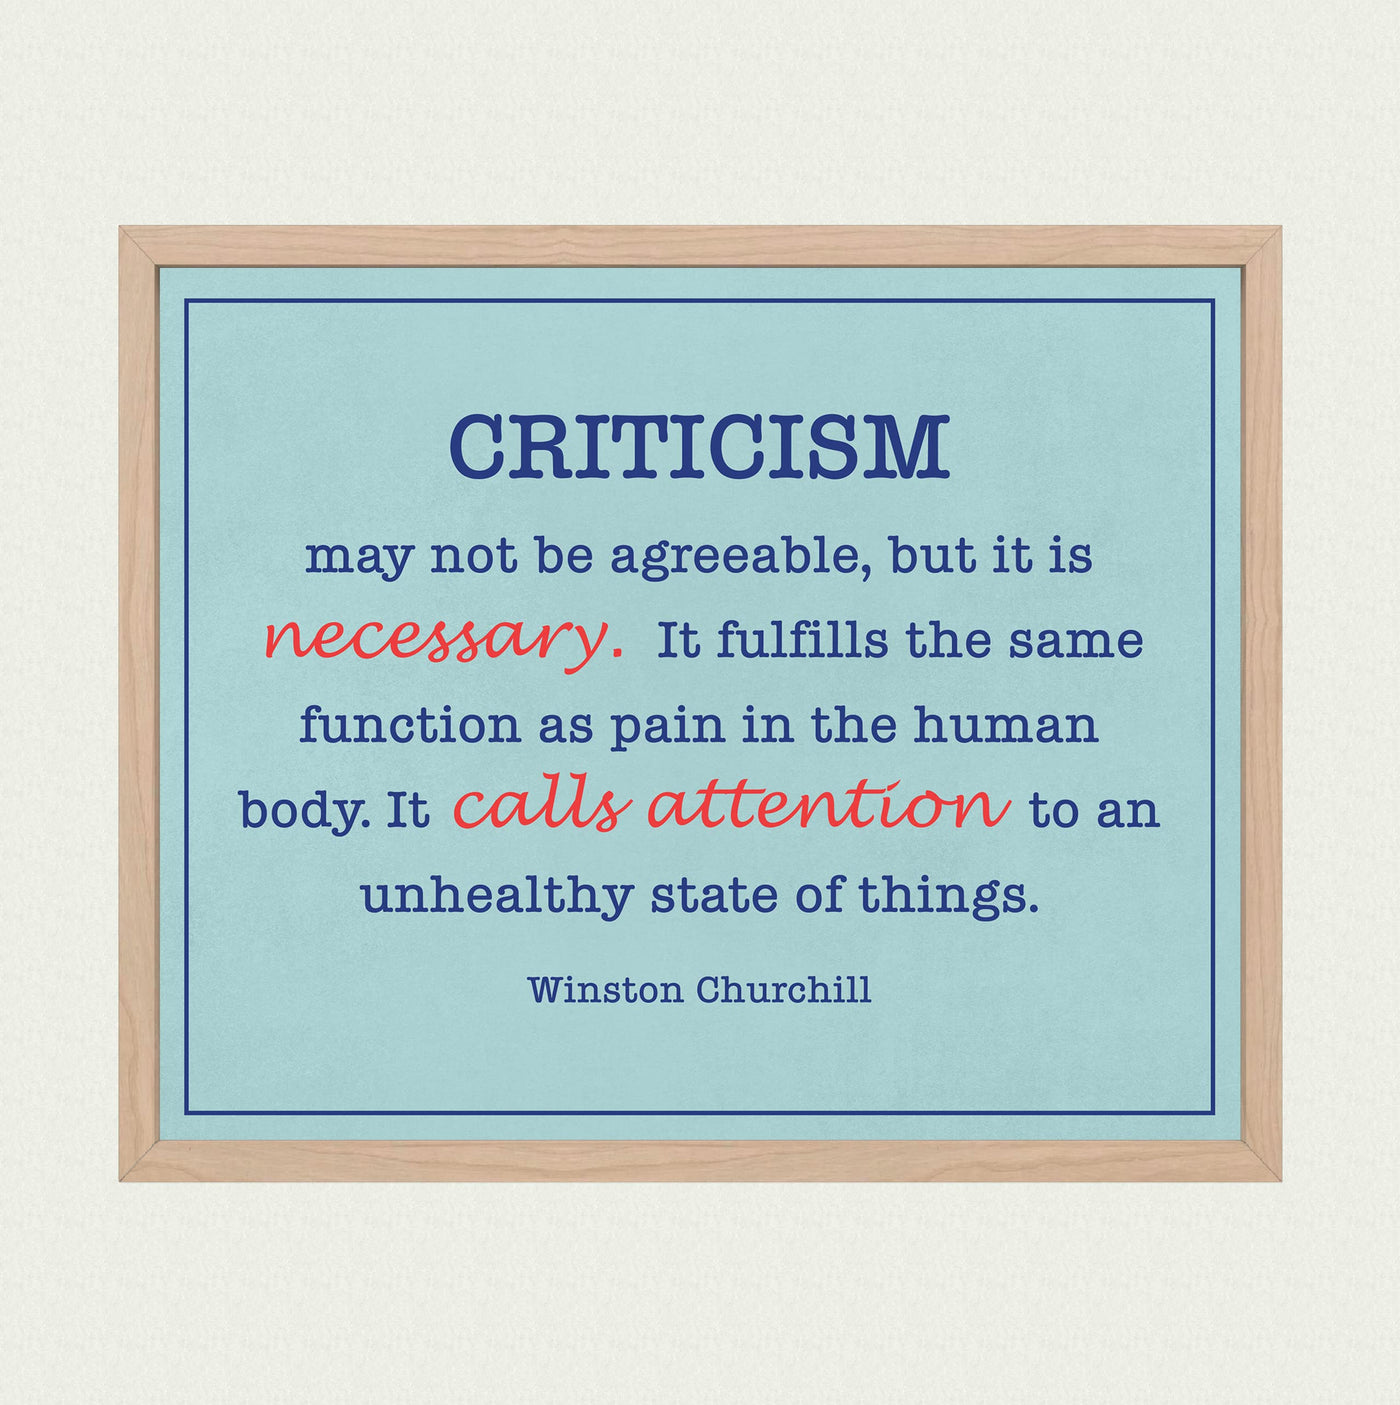 Winston Churchill Quotes-"Criticism May Not Be Agreeable-But It's Necessary"-10 x 8" Inspirational Wall Print Art-Ready to Frame. Motivational Home-Office-History-Classroom-Library Decor. Great Gift!